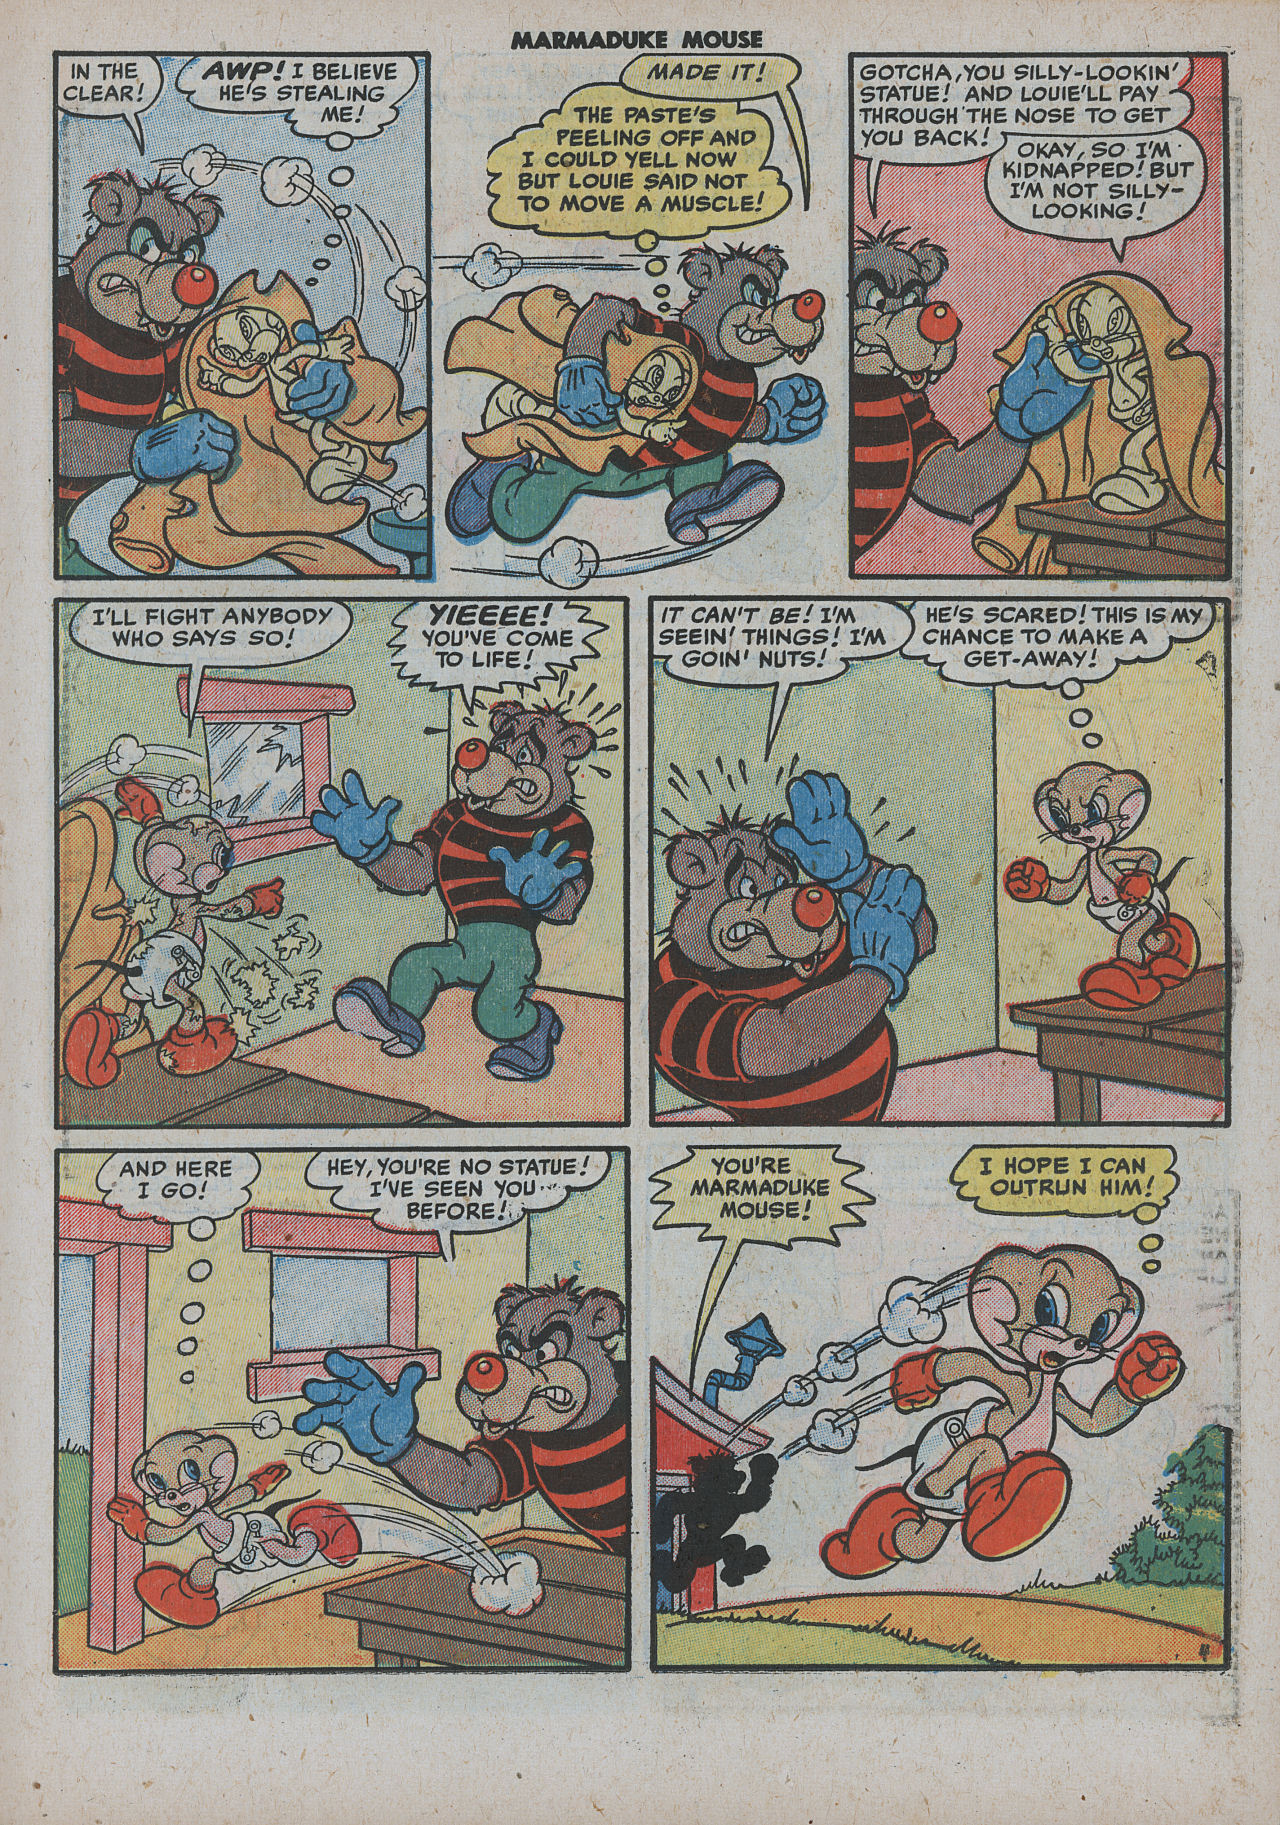 Read online Marmaduke Mouse comic -  Issue #24 - 29